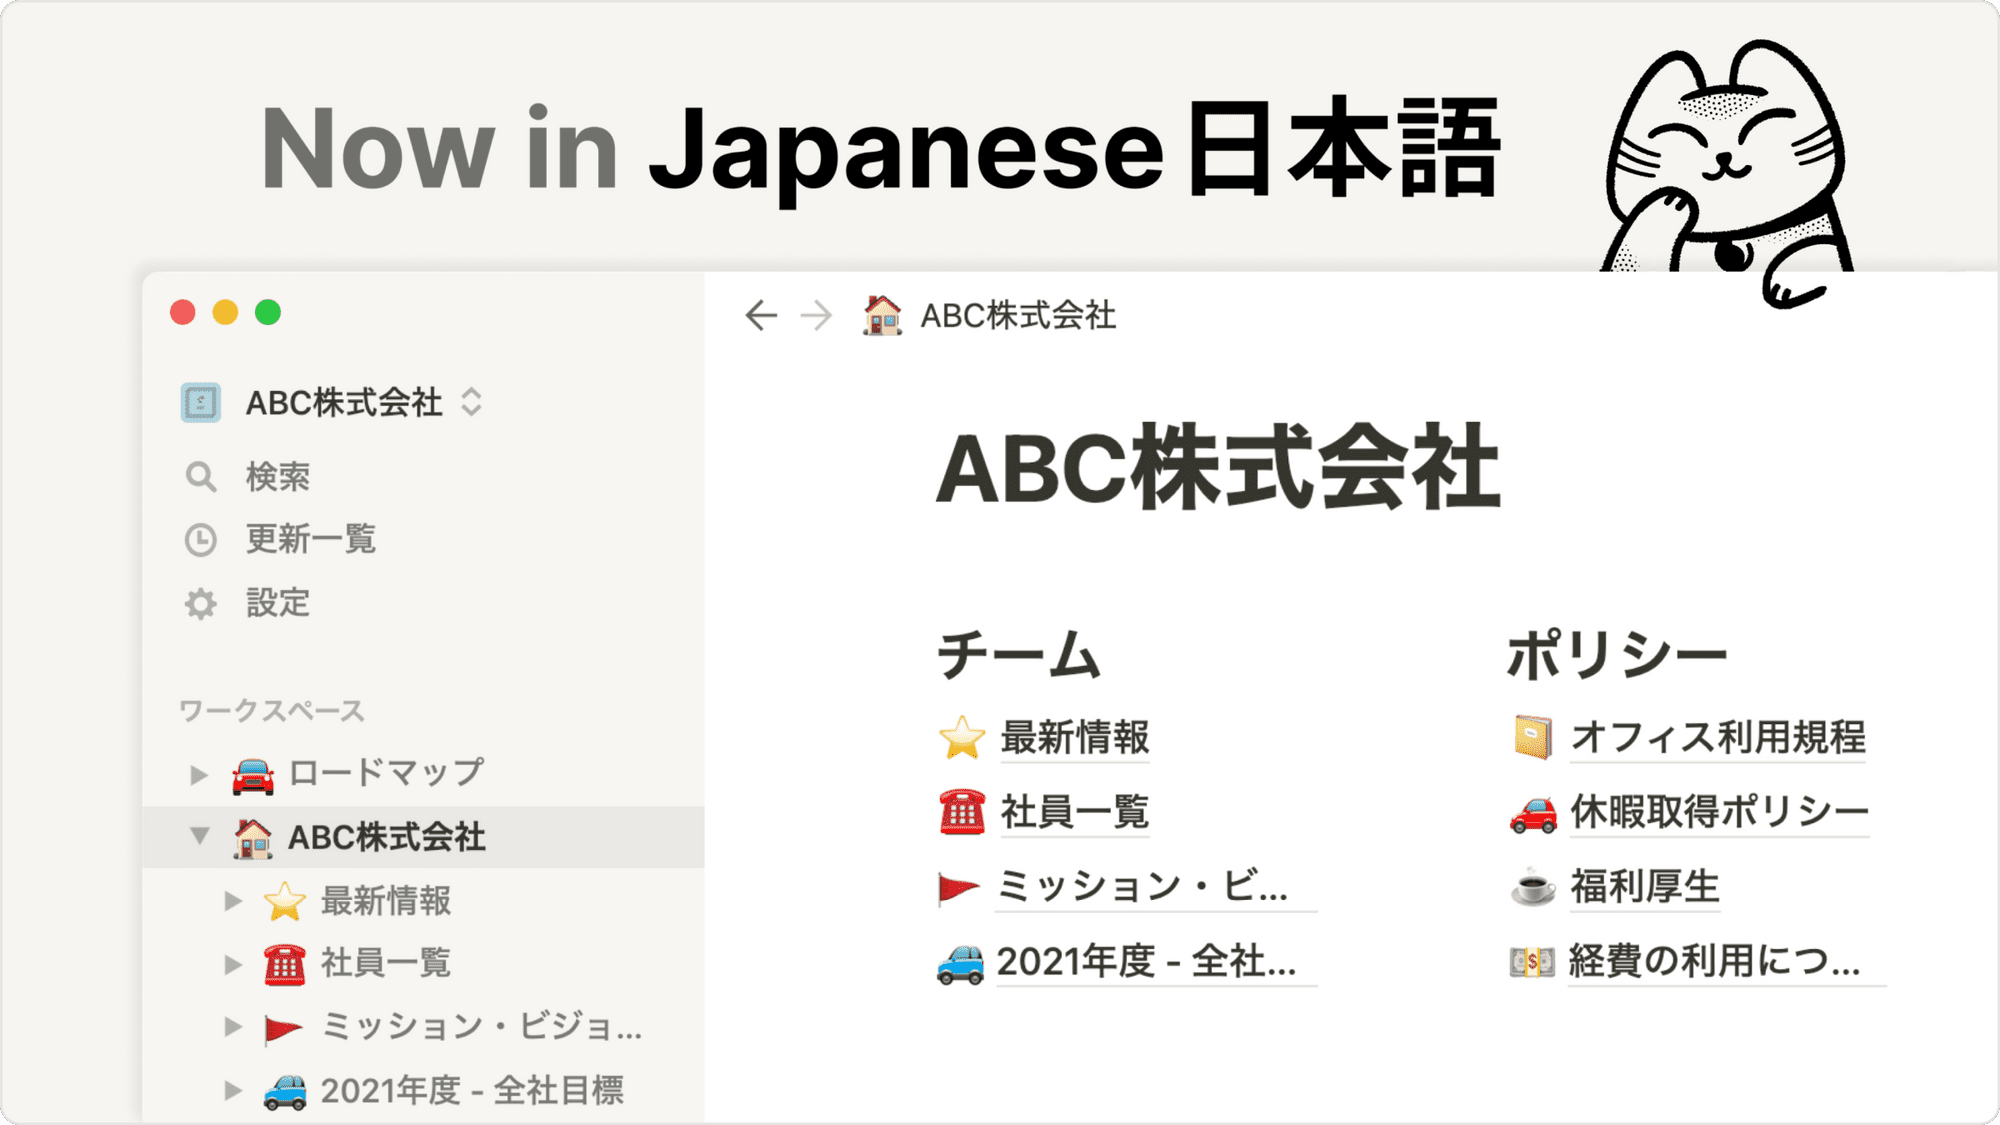 Notion in Japanese